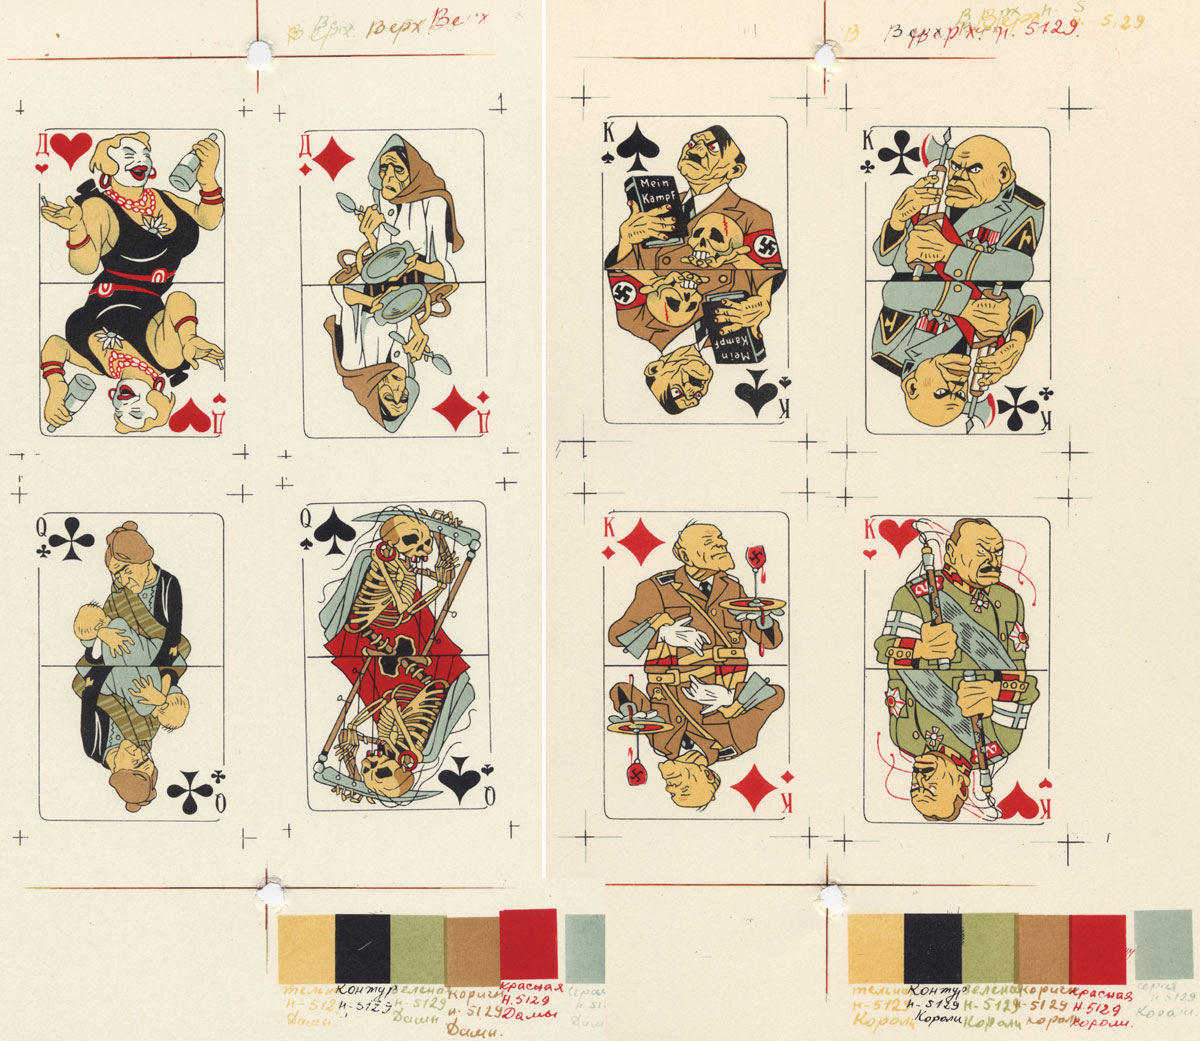 Russian anti-fascist playing cards published in 1943